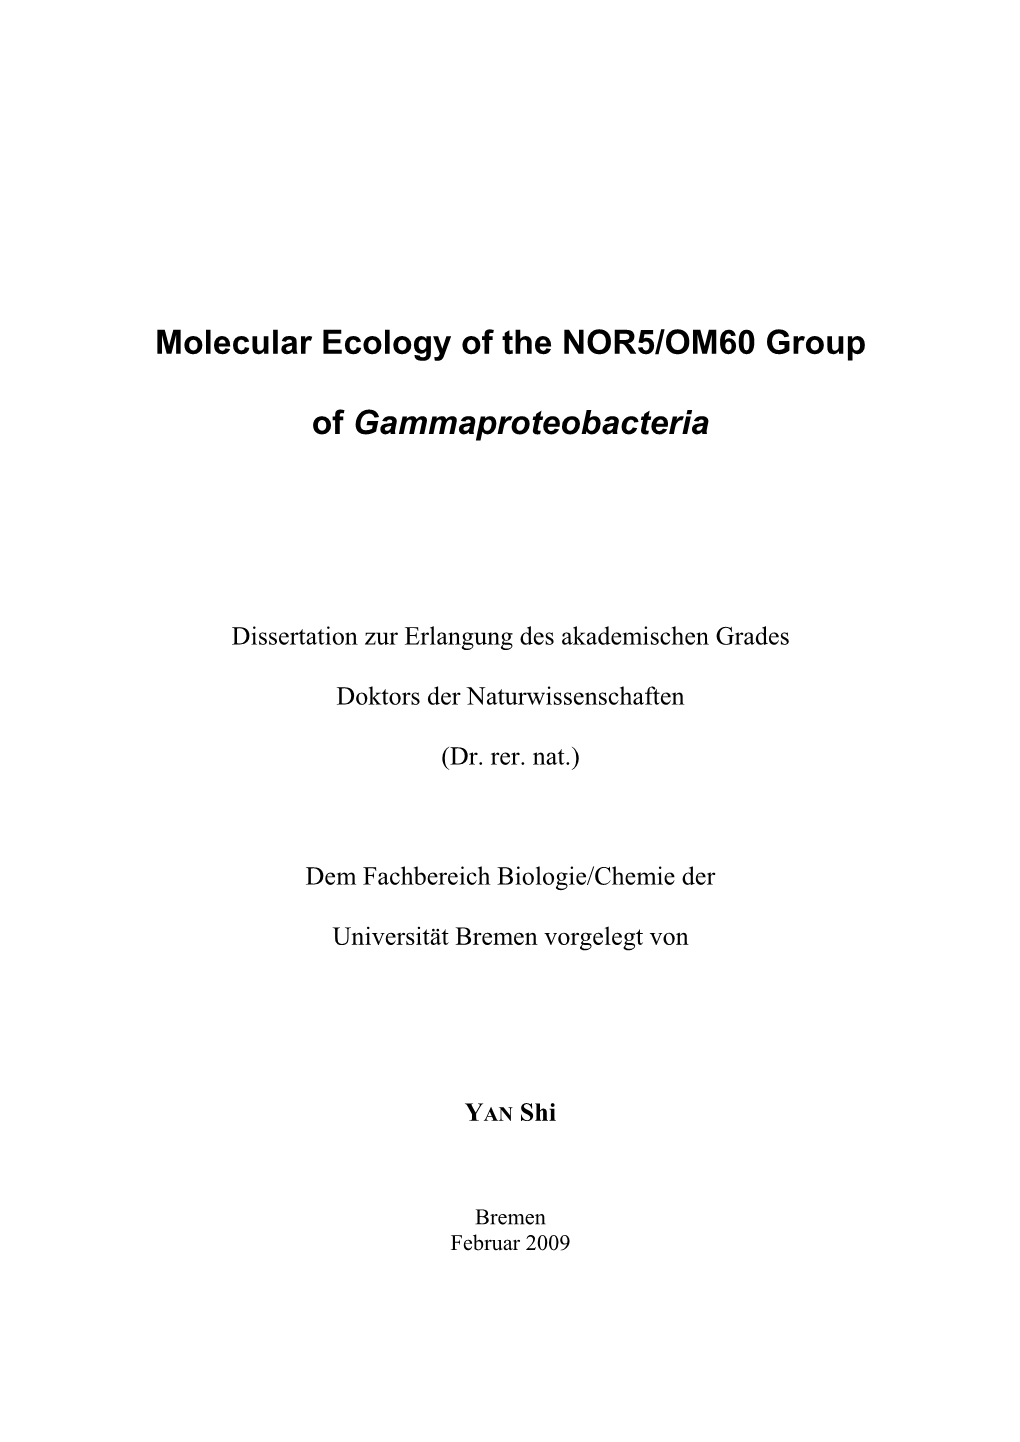 Molecular Ecology of the NOR5/OM60 Group Of